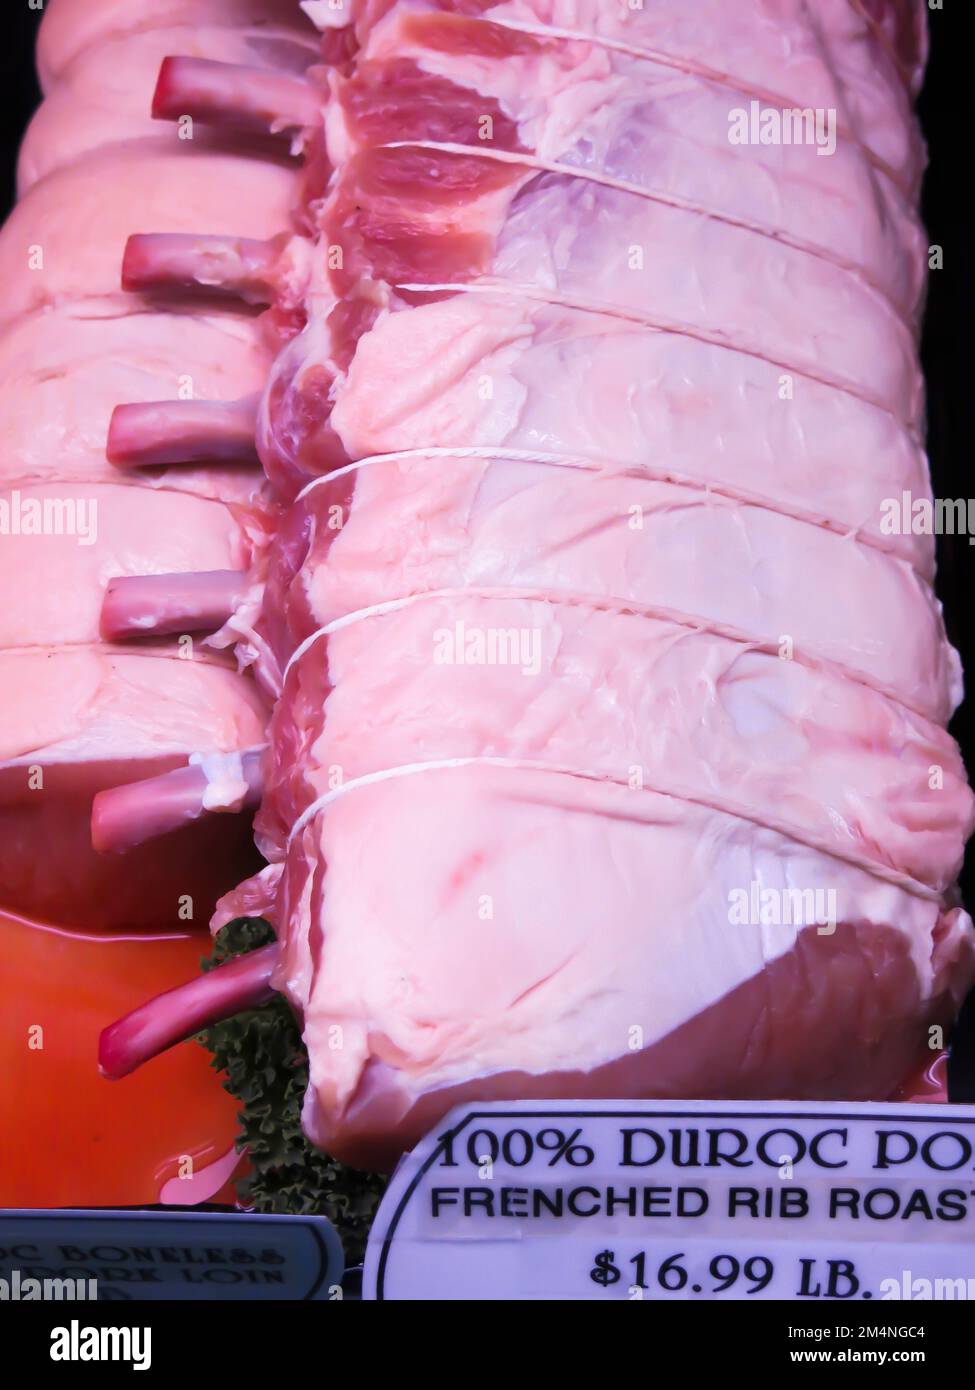 Fresh Beef on Display for Sale - Frenched Rib Roast Stock Photo